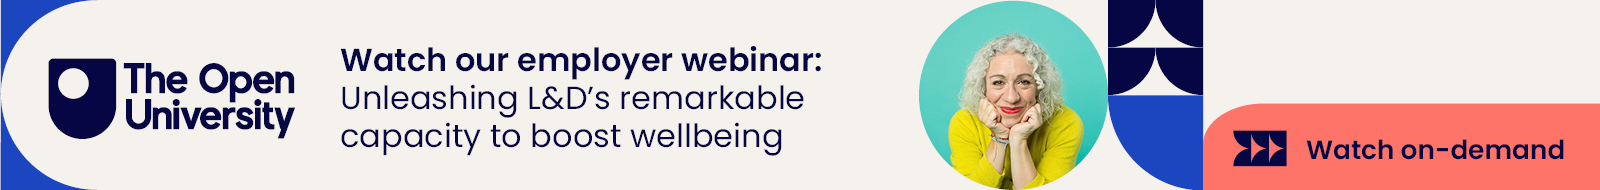 Watch our employer webinar: Unleashing L&D's remarkable capacity to boost wellbeing